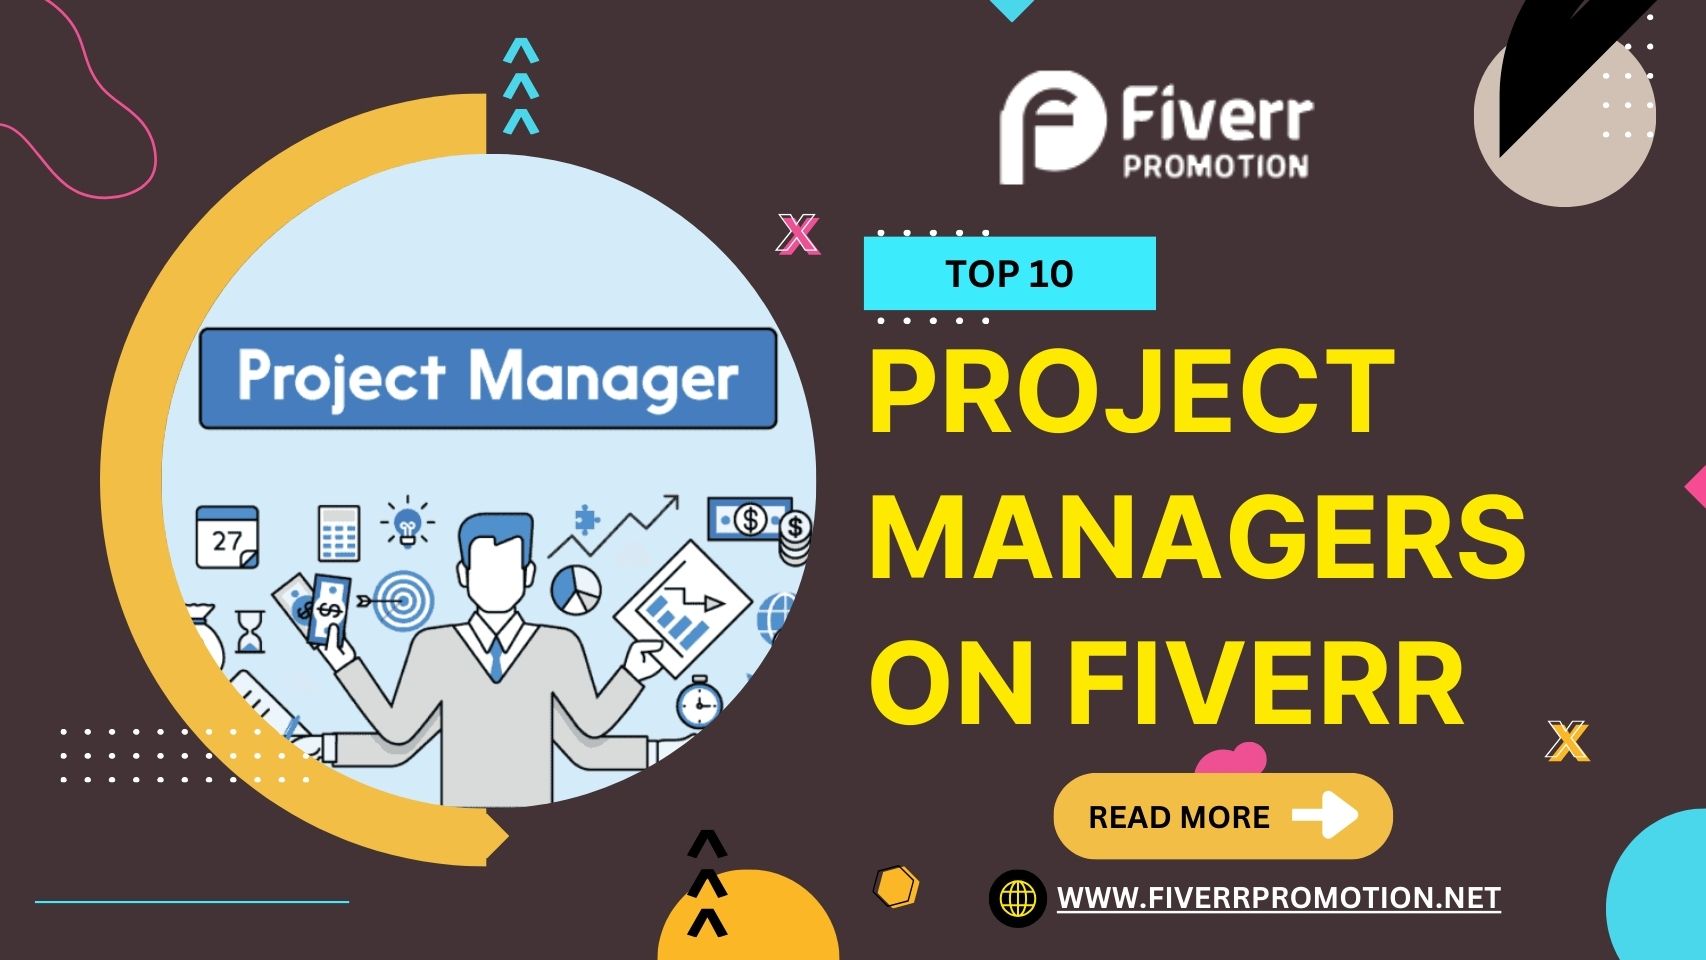 Top 10 Project Managers on Fiverr